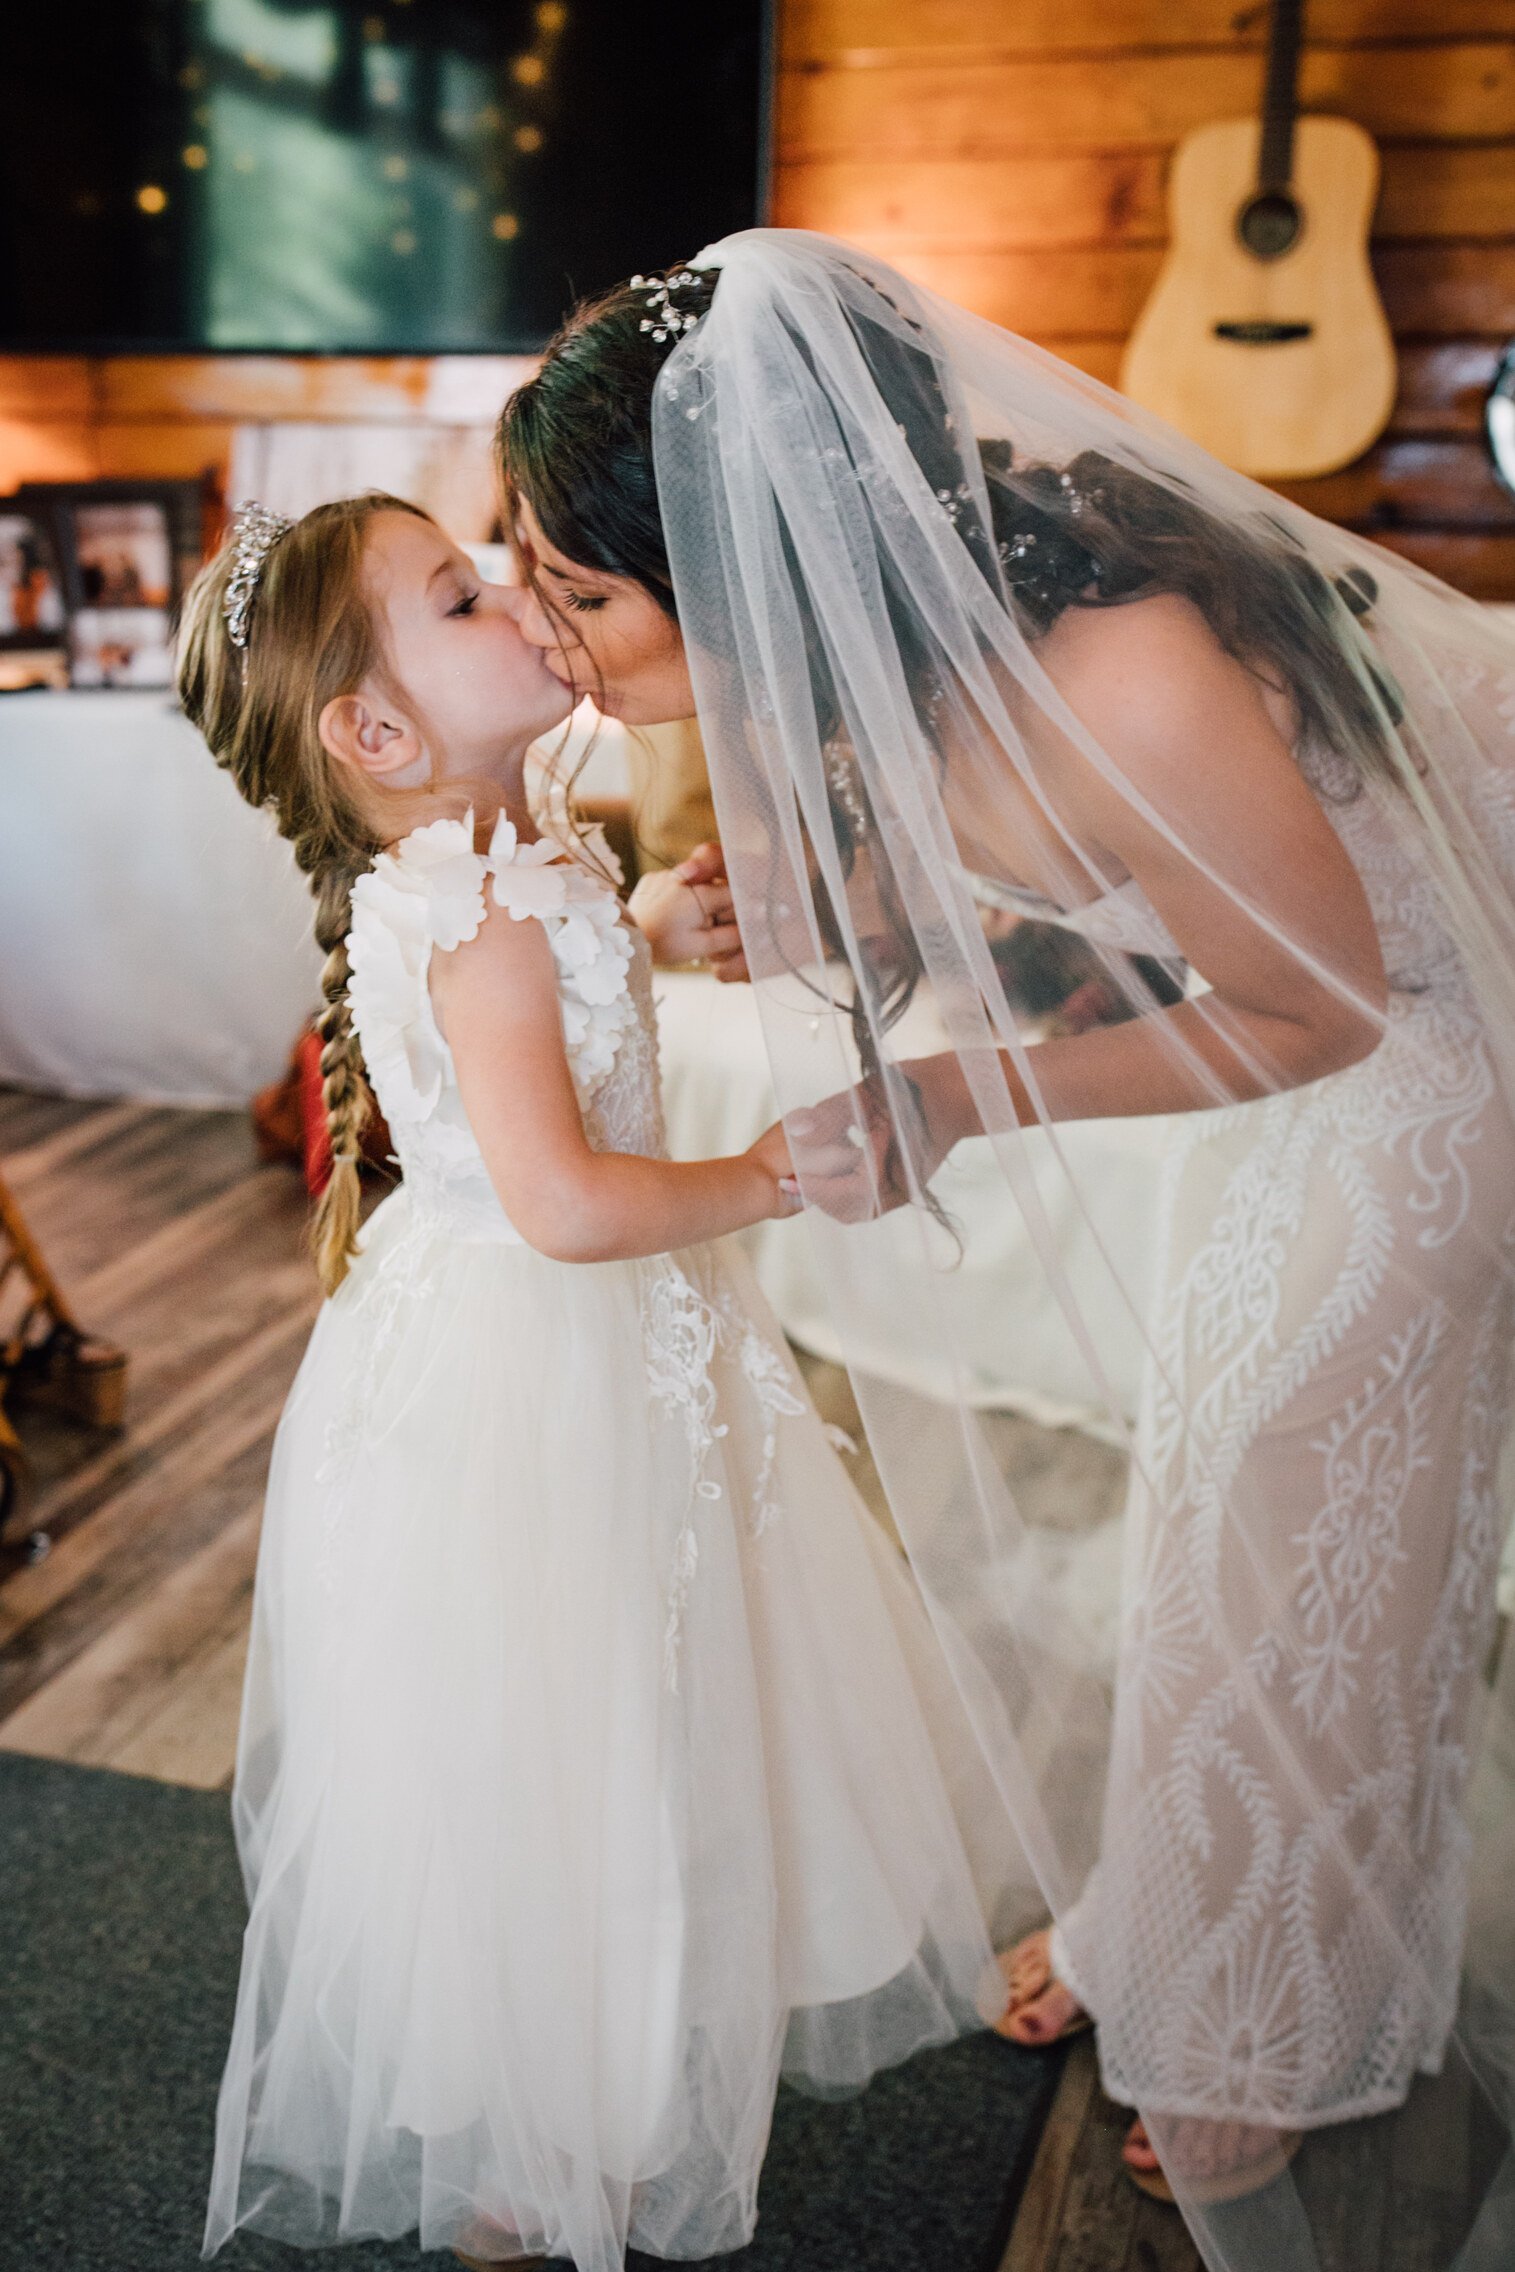  Bride-to-be kisses her daughter before her backyard wedding ceremony 